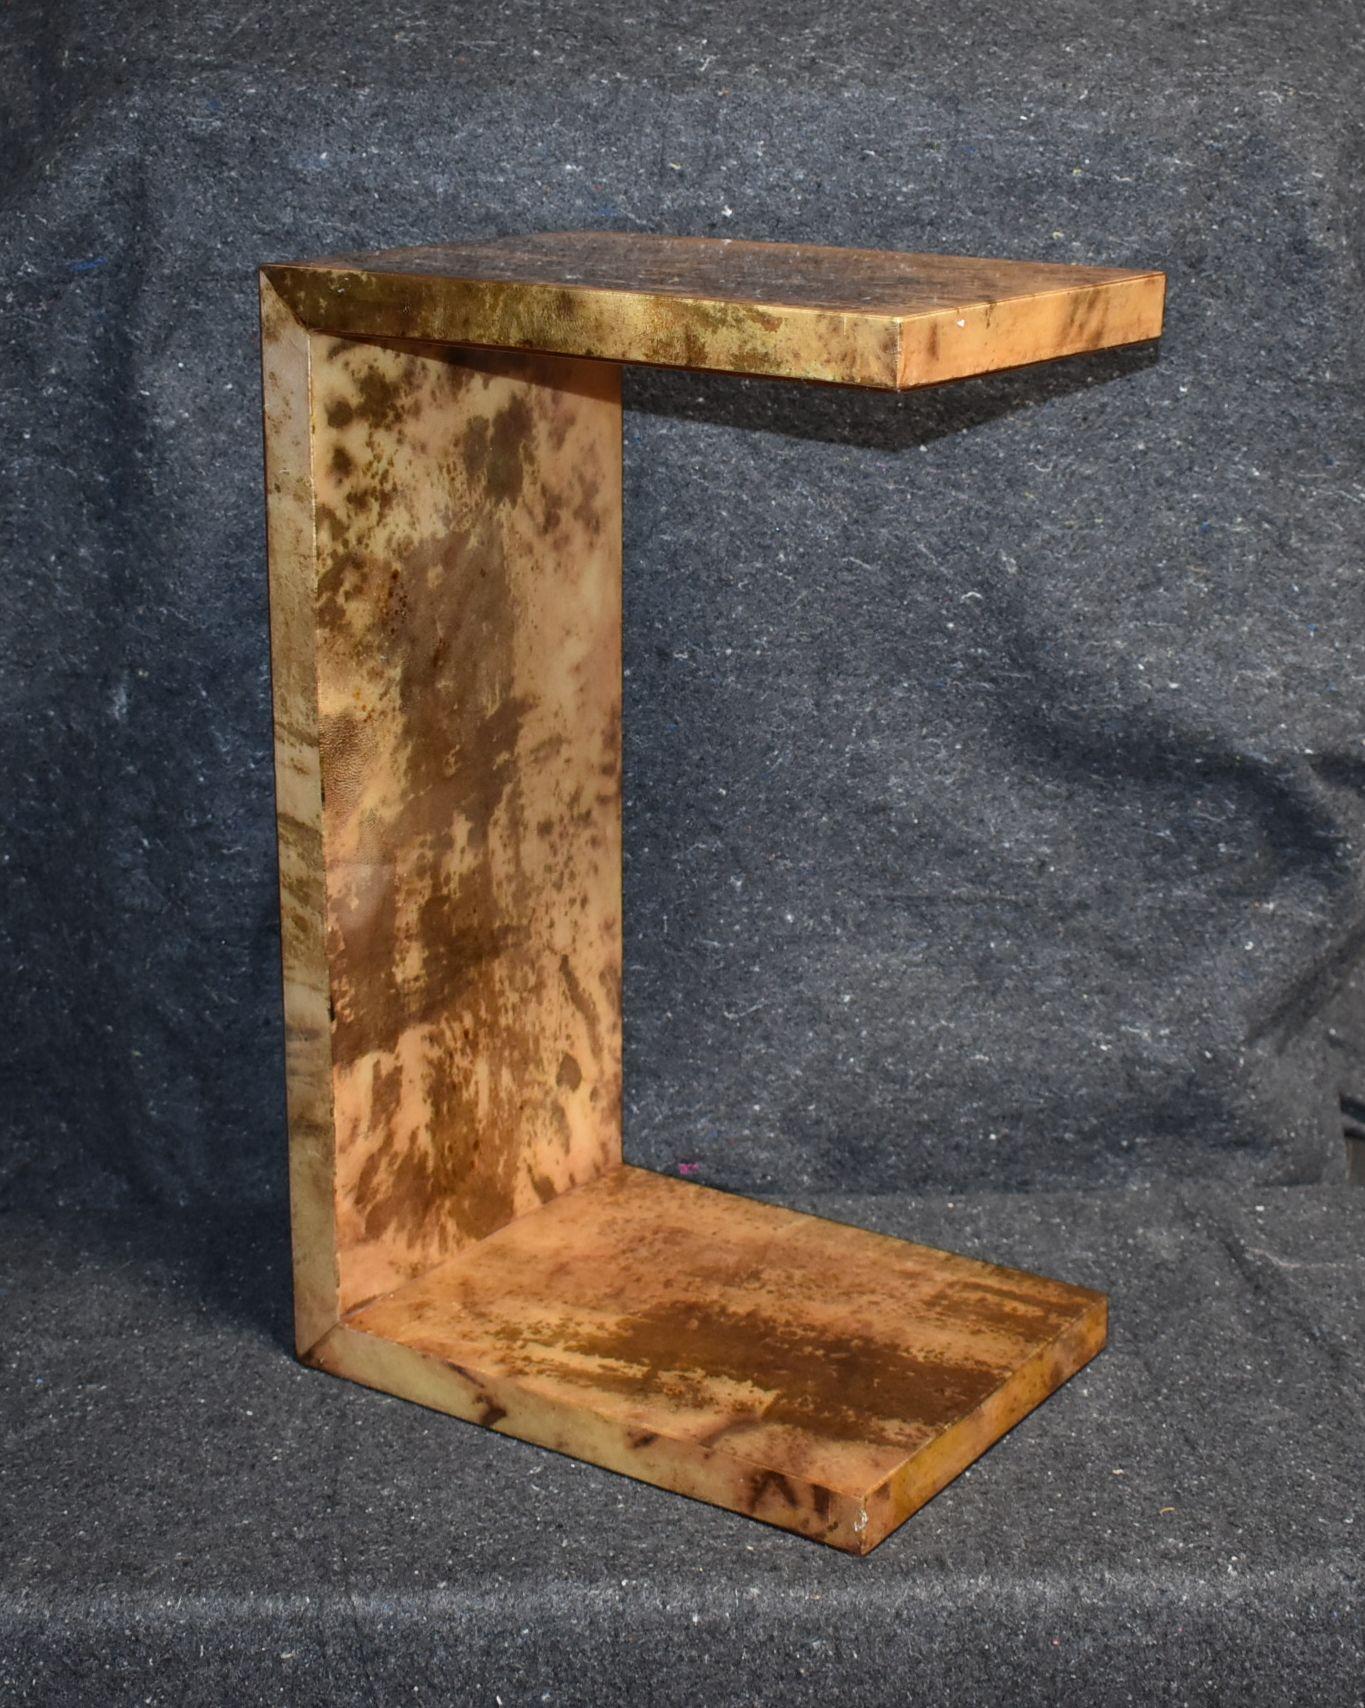 Drink side table cover with goatskin and resin finish.
Parchment is in varying shades of light and brown, beige, dark natural. (High gloss polyester resin filled finish).